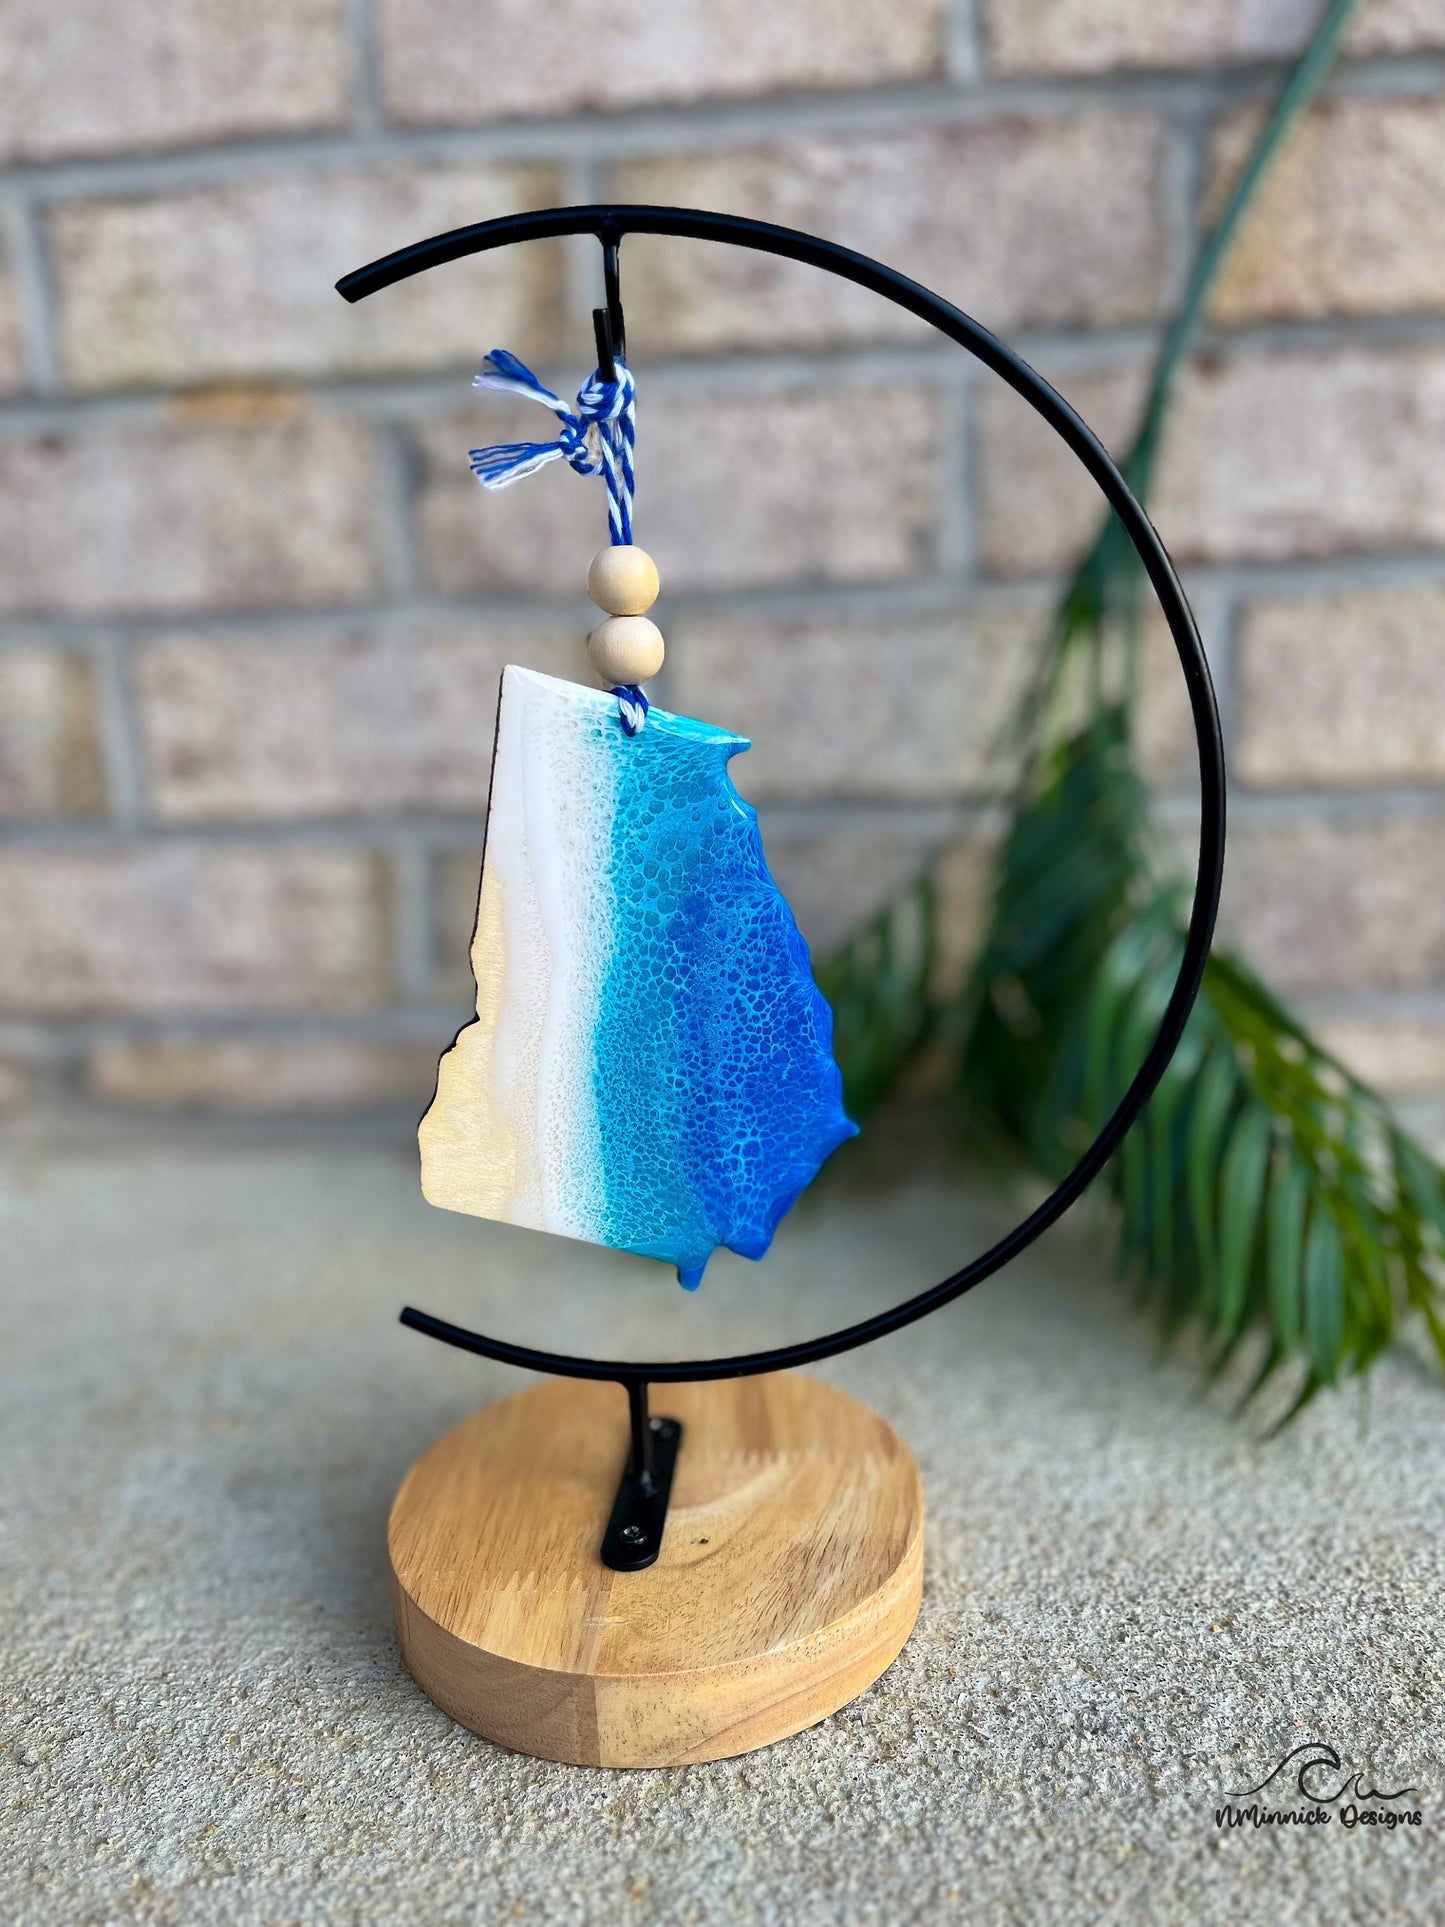 Georgia ornament with ocean resin art hanging from an ornament stand.